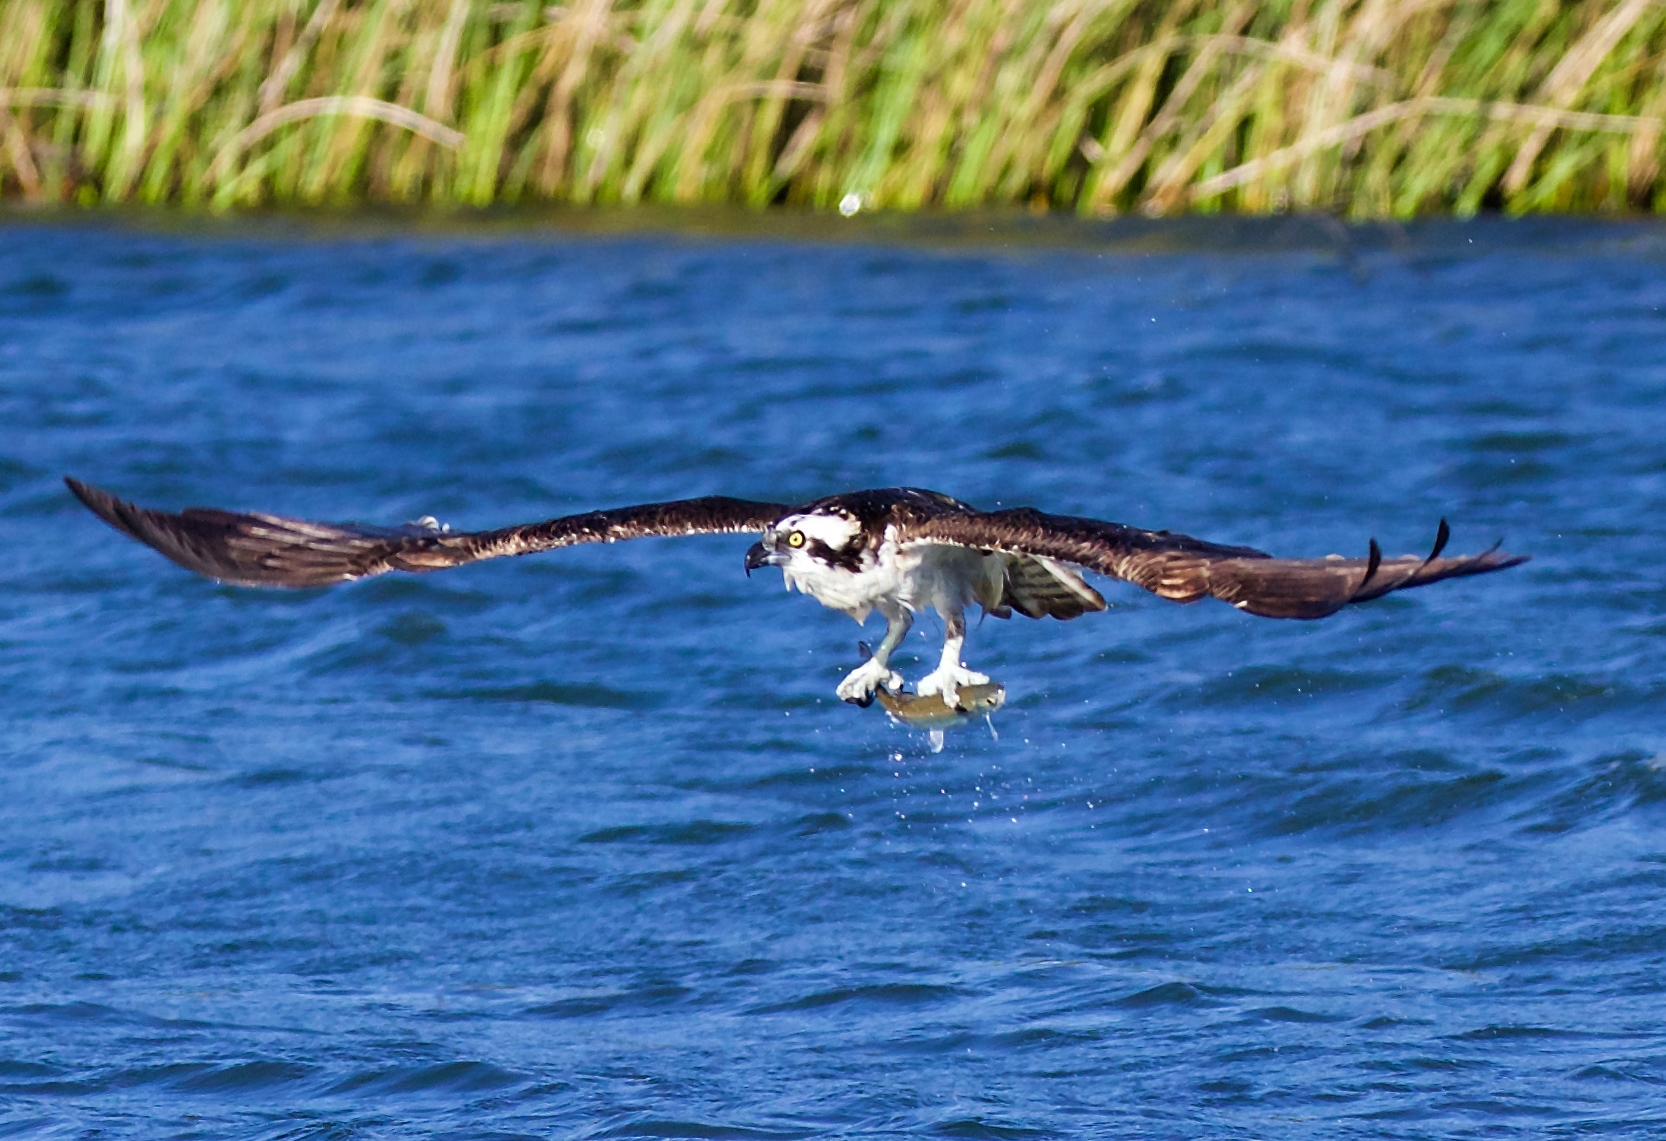 An Osprey fishing, as photographed by Gaily Jackson. – Mendonoma